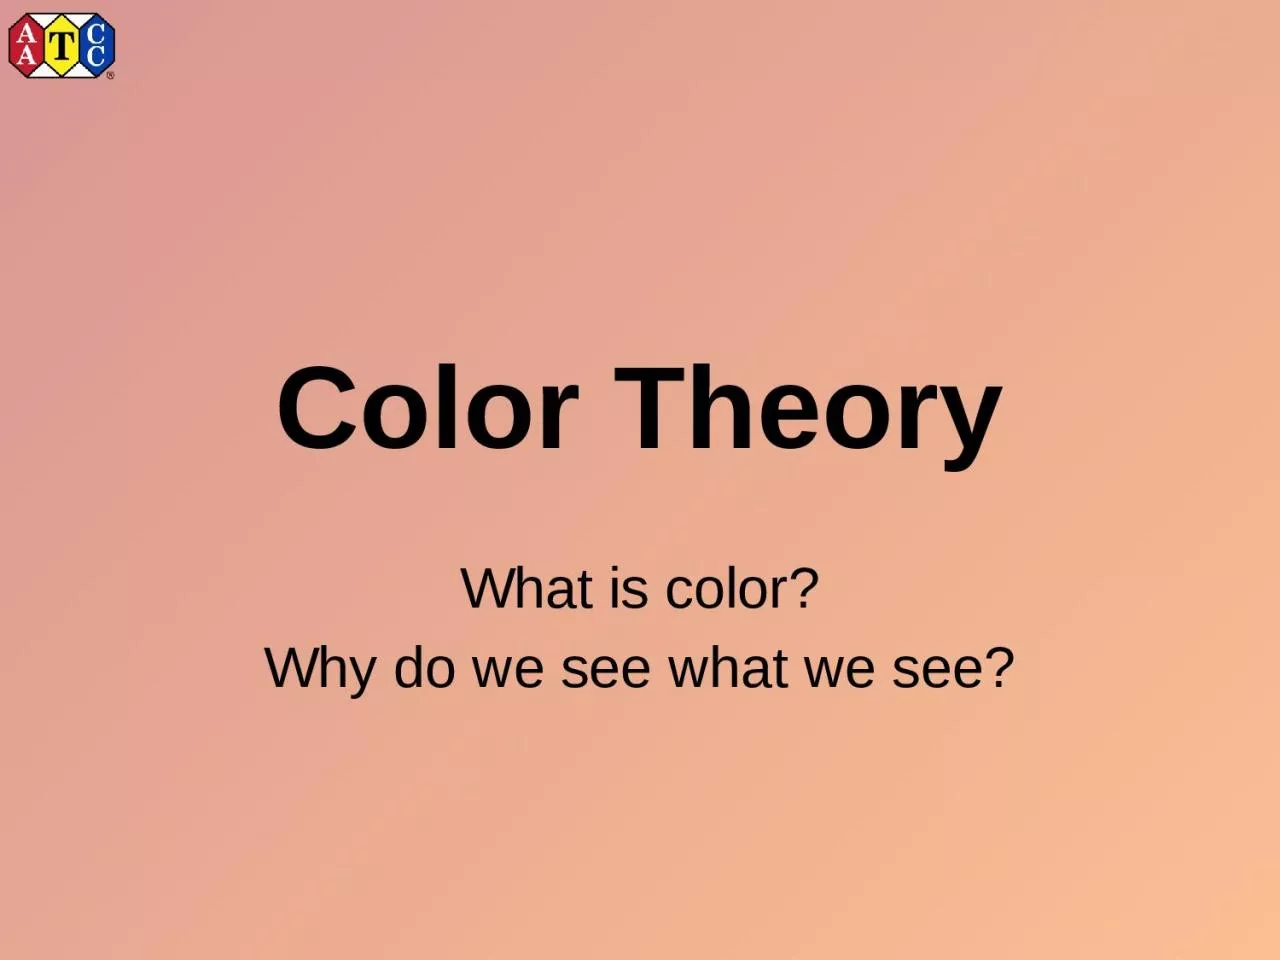 Color Theory What is color?